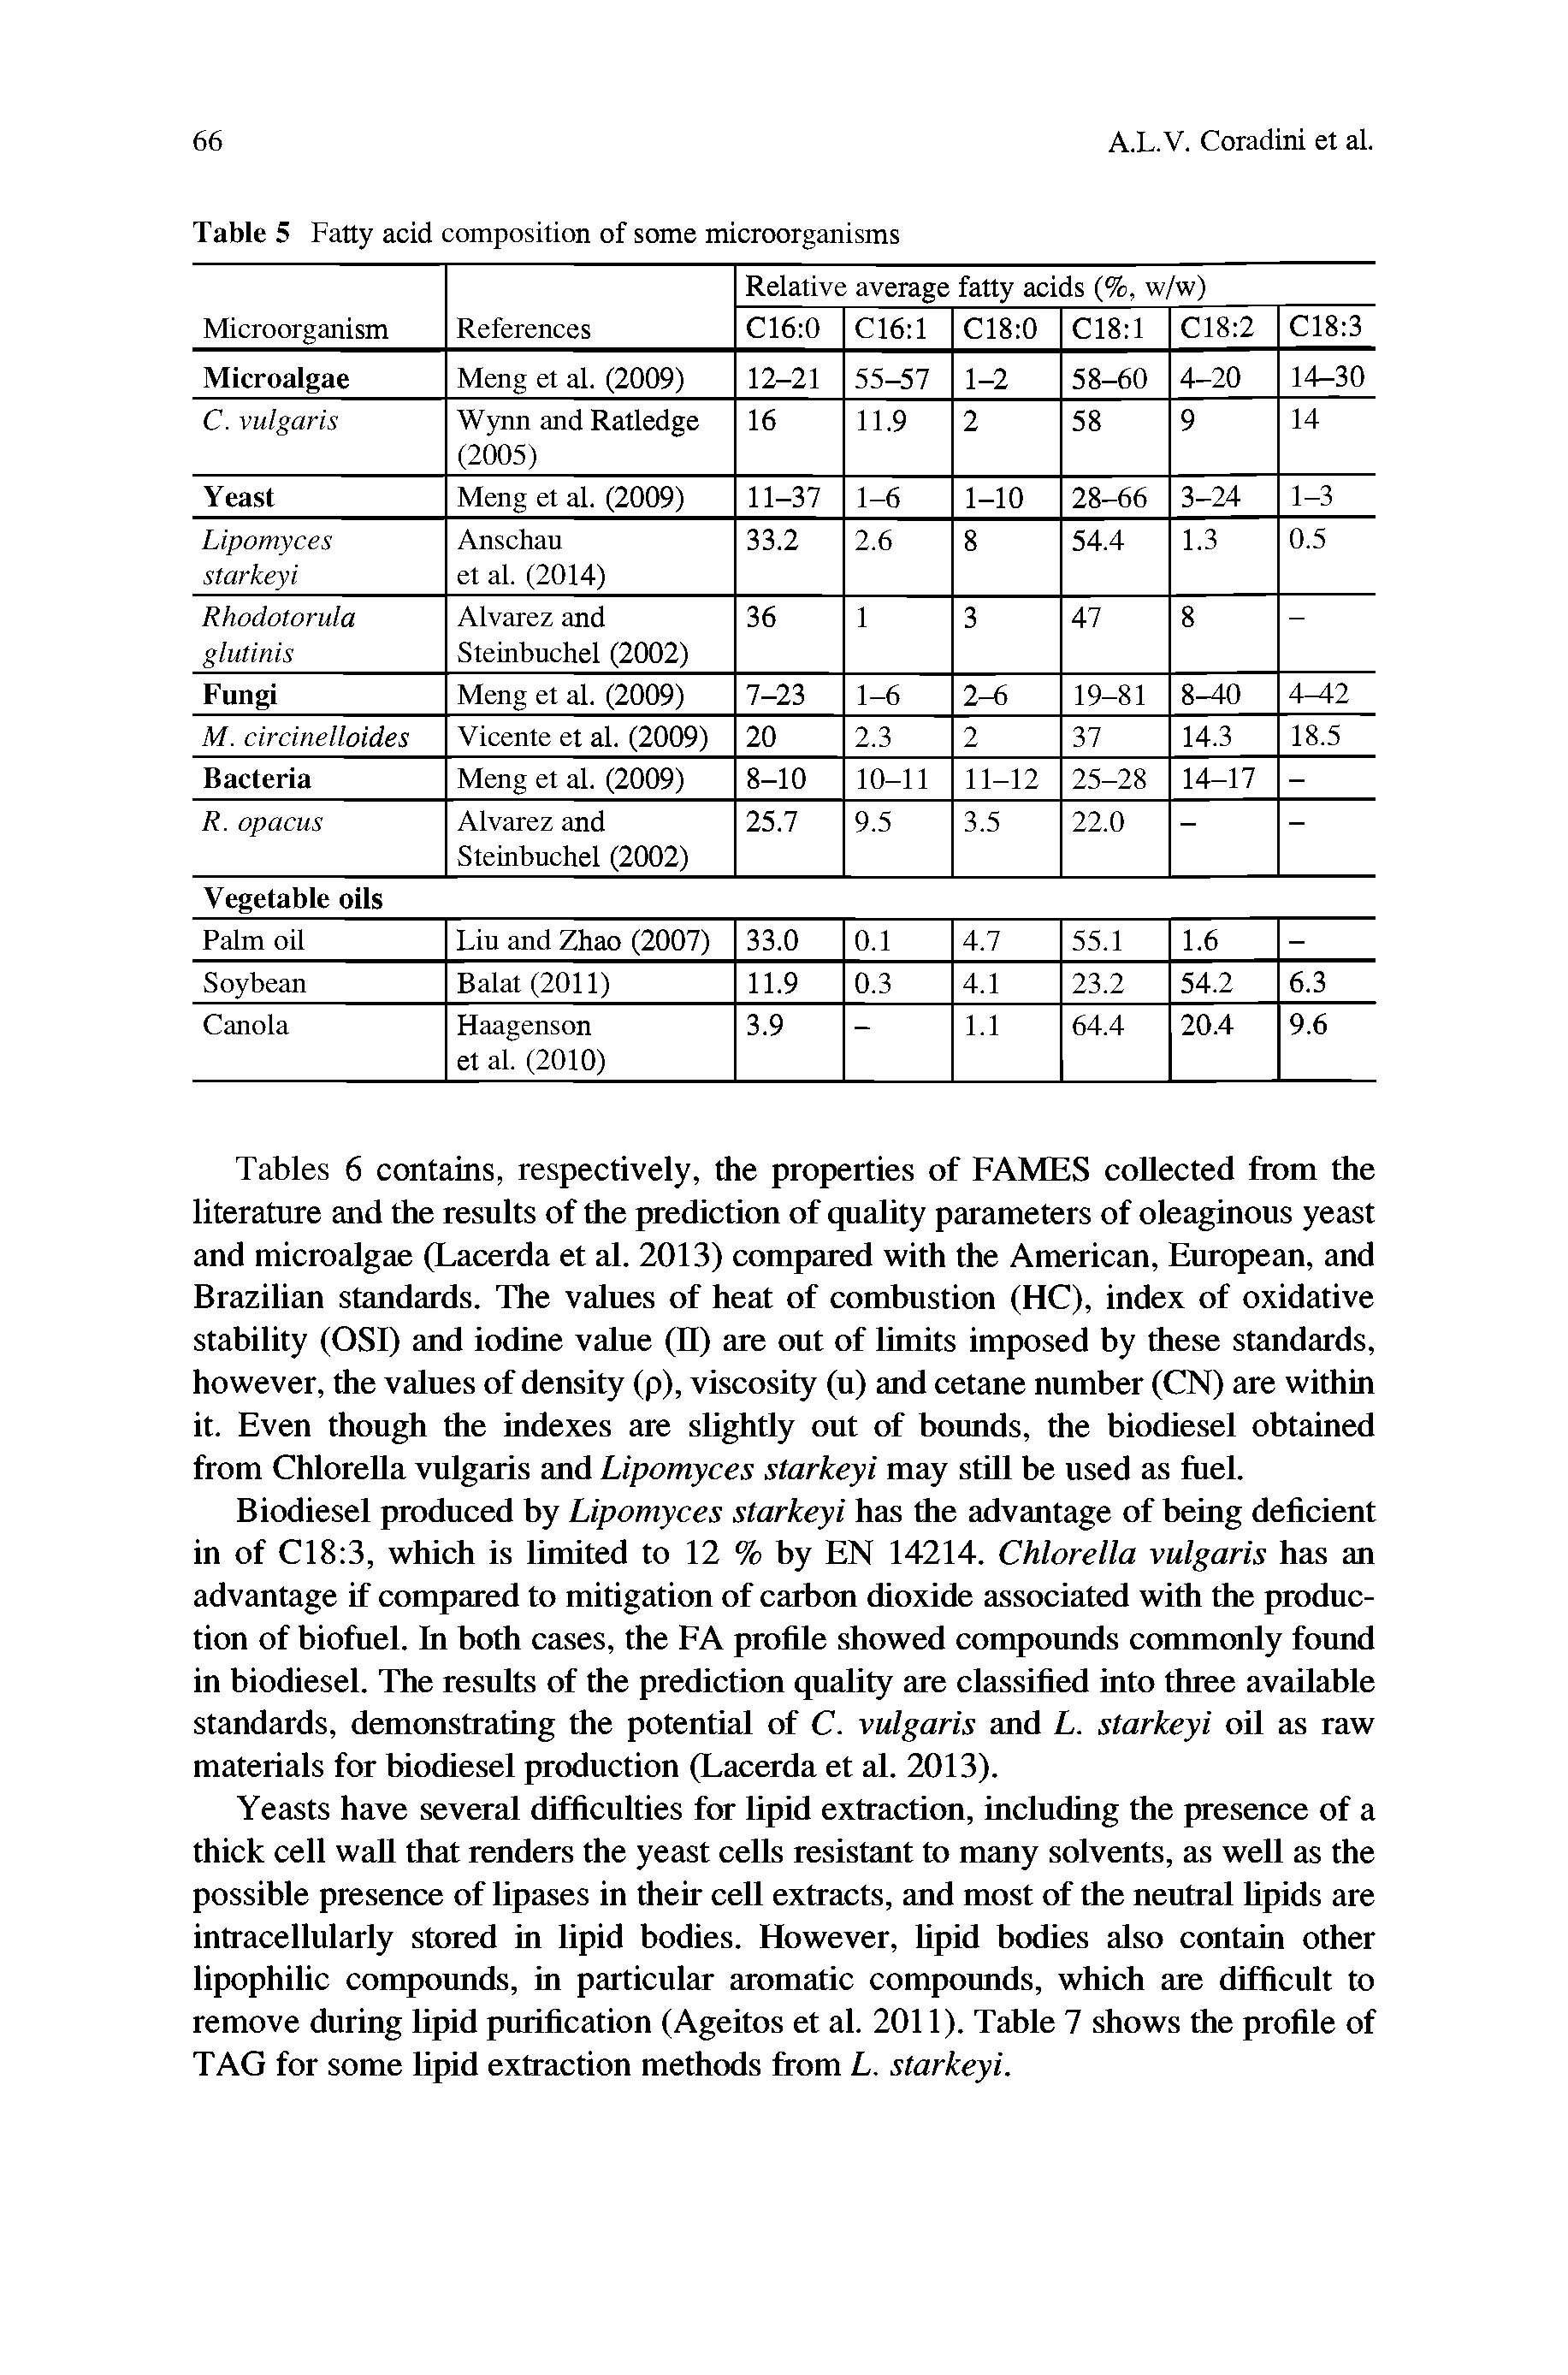 Tables 6 contains, respectively, the properties of FAMES collected from the literature and the results of the prediction of quality parameters of oleaginous yeast and microalgae (Lacerda et al. 2013) compared with the American, European, and Brazilian standards. The values of heat of combustion (HC), index of oxidative stability (OSI) and iodine value (II) are out of limits imposed by these standards, however, the values of density (p), viscosity (u) and cetane number (CN) are within it. Even though the indexes are slightly out of bounds, the biodiesel obtained from Chlorella vulgaris and Lipomyces starkeyi may still be used as fuel.